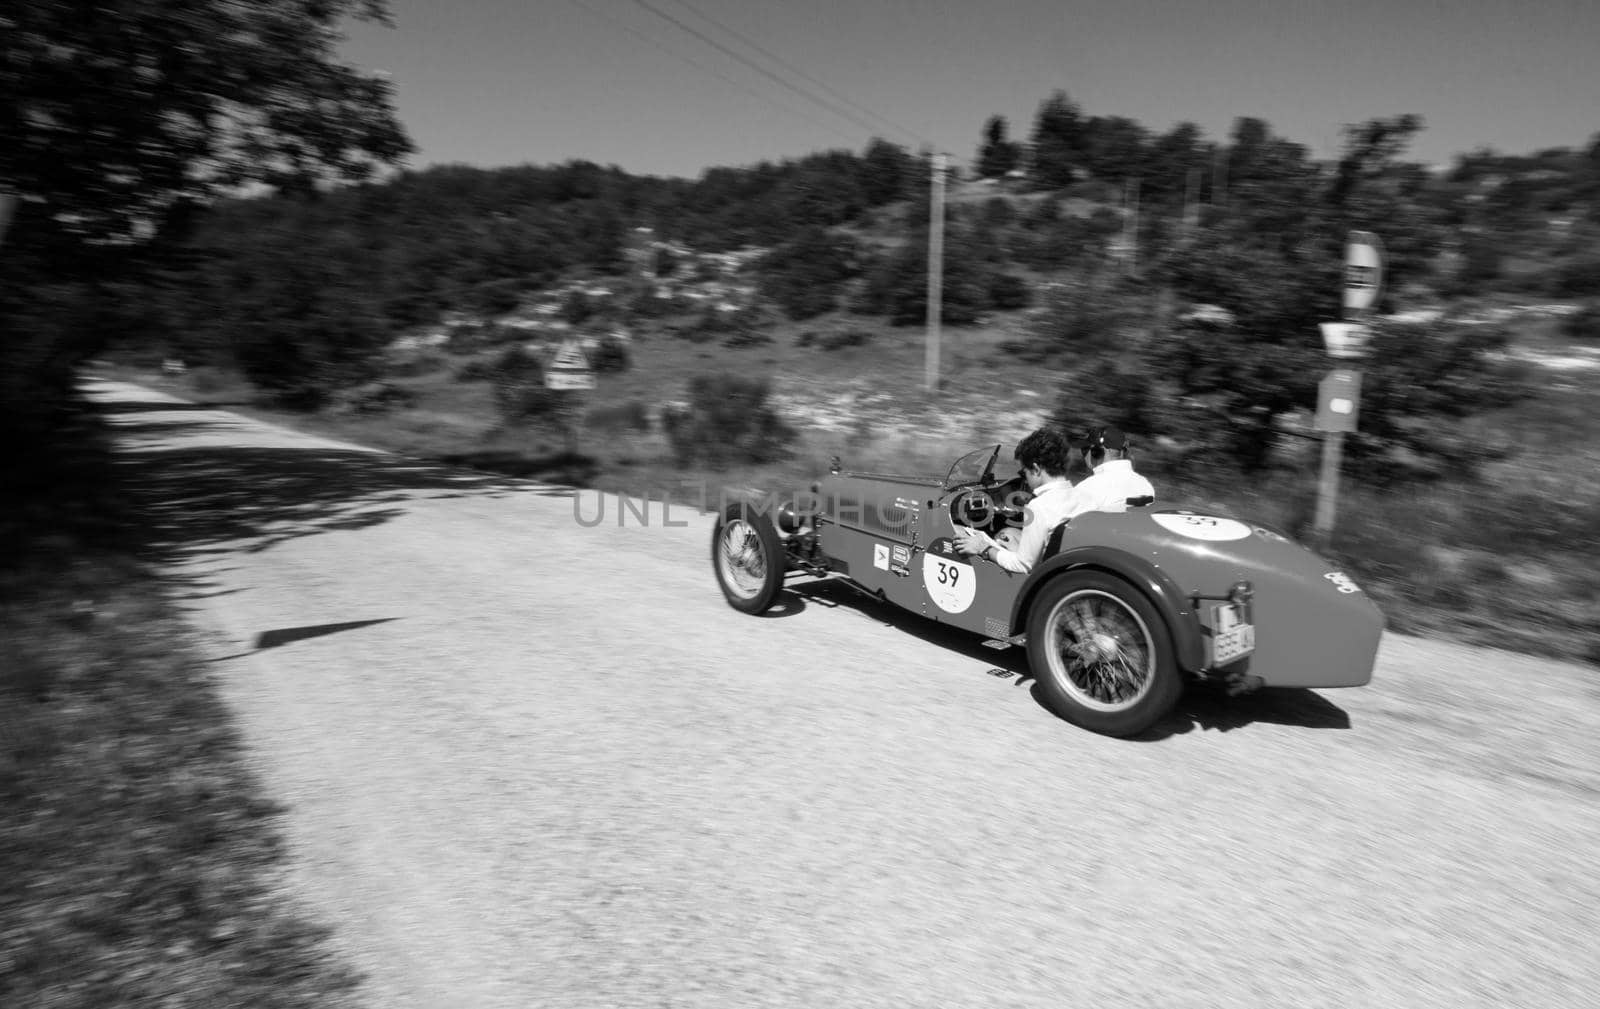 RALLY ABC 1100 1928 on an old racing car in rally Mille MigLIA by massimocampanari